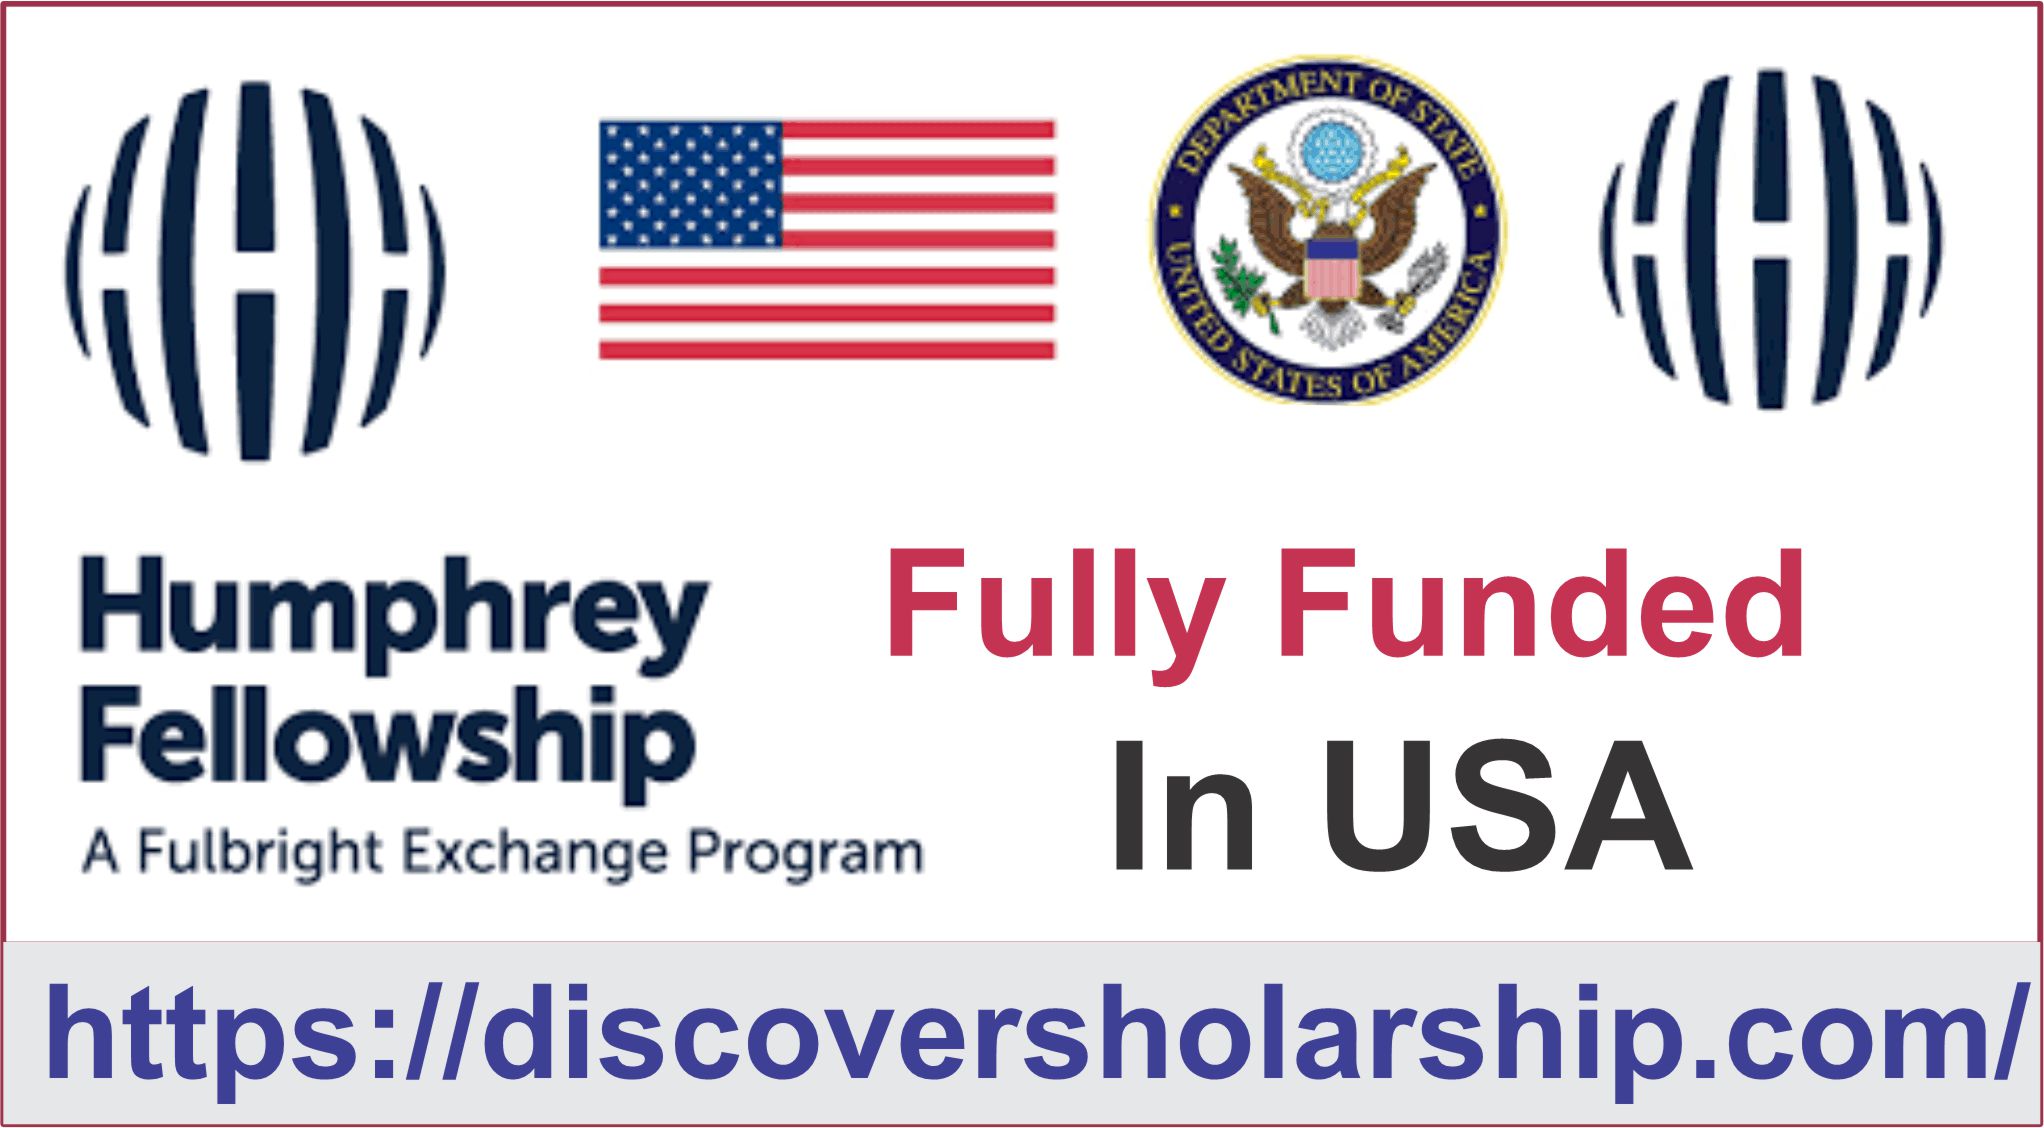 Humphrey Fellowship Program in USA (Fully Funded)